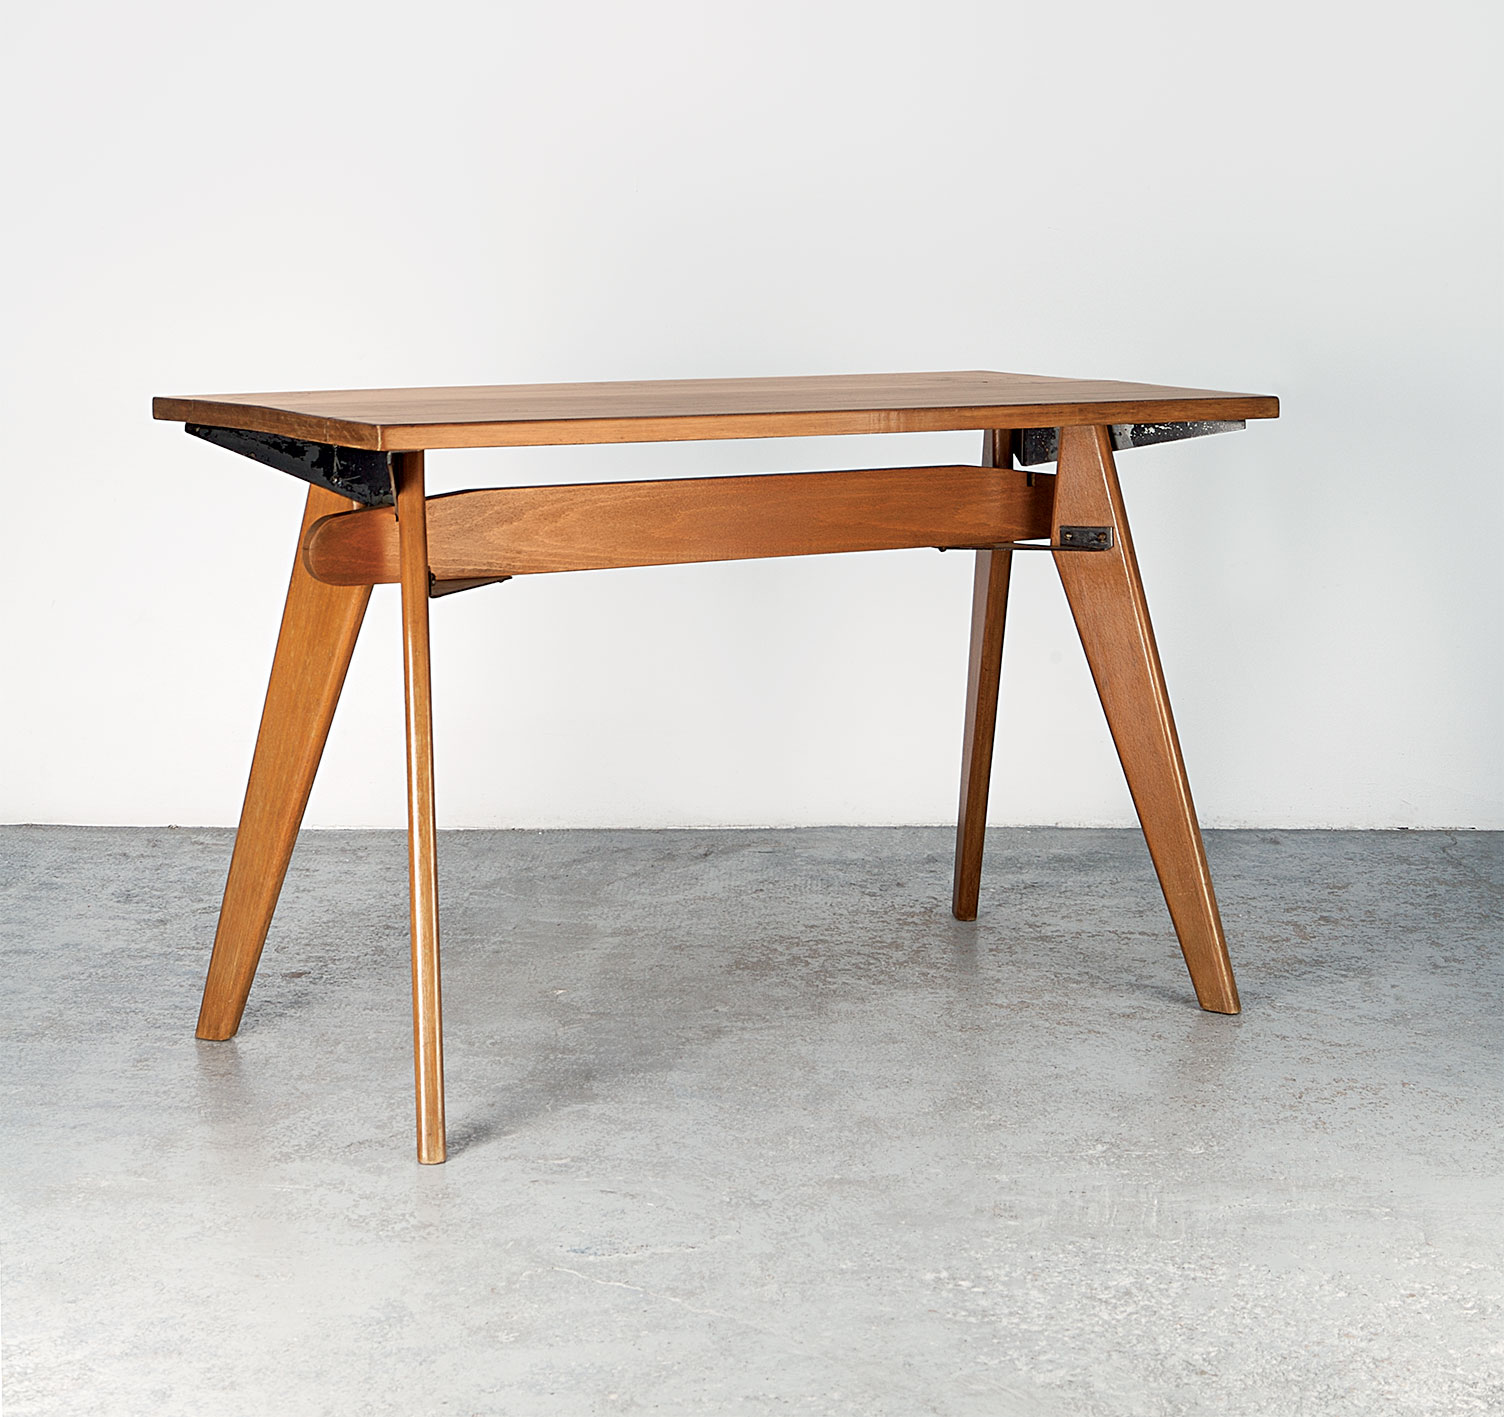 BCC table, prototype created in collaboration with Pierre Jeanneret, 1942.